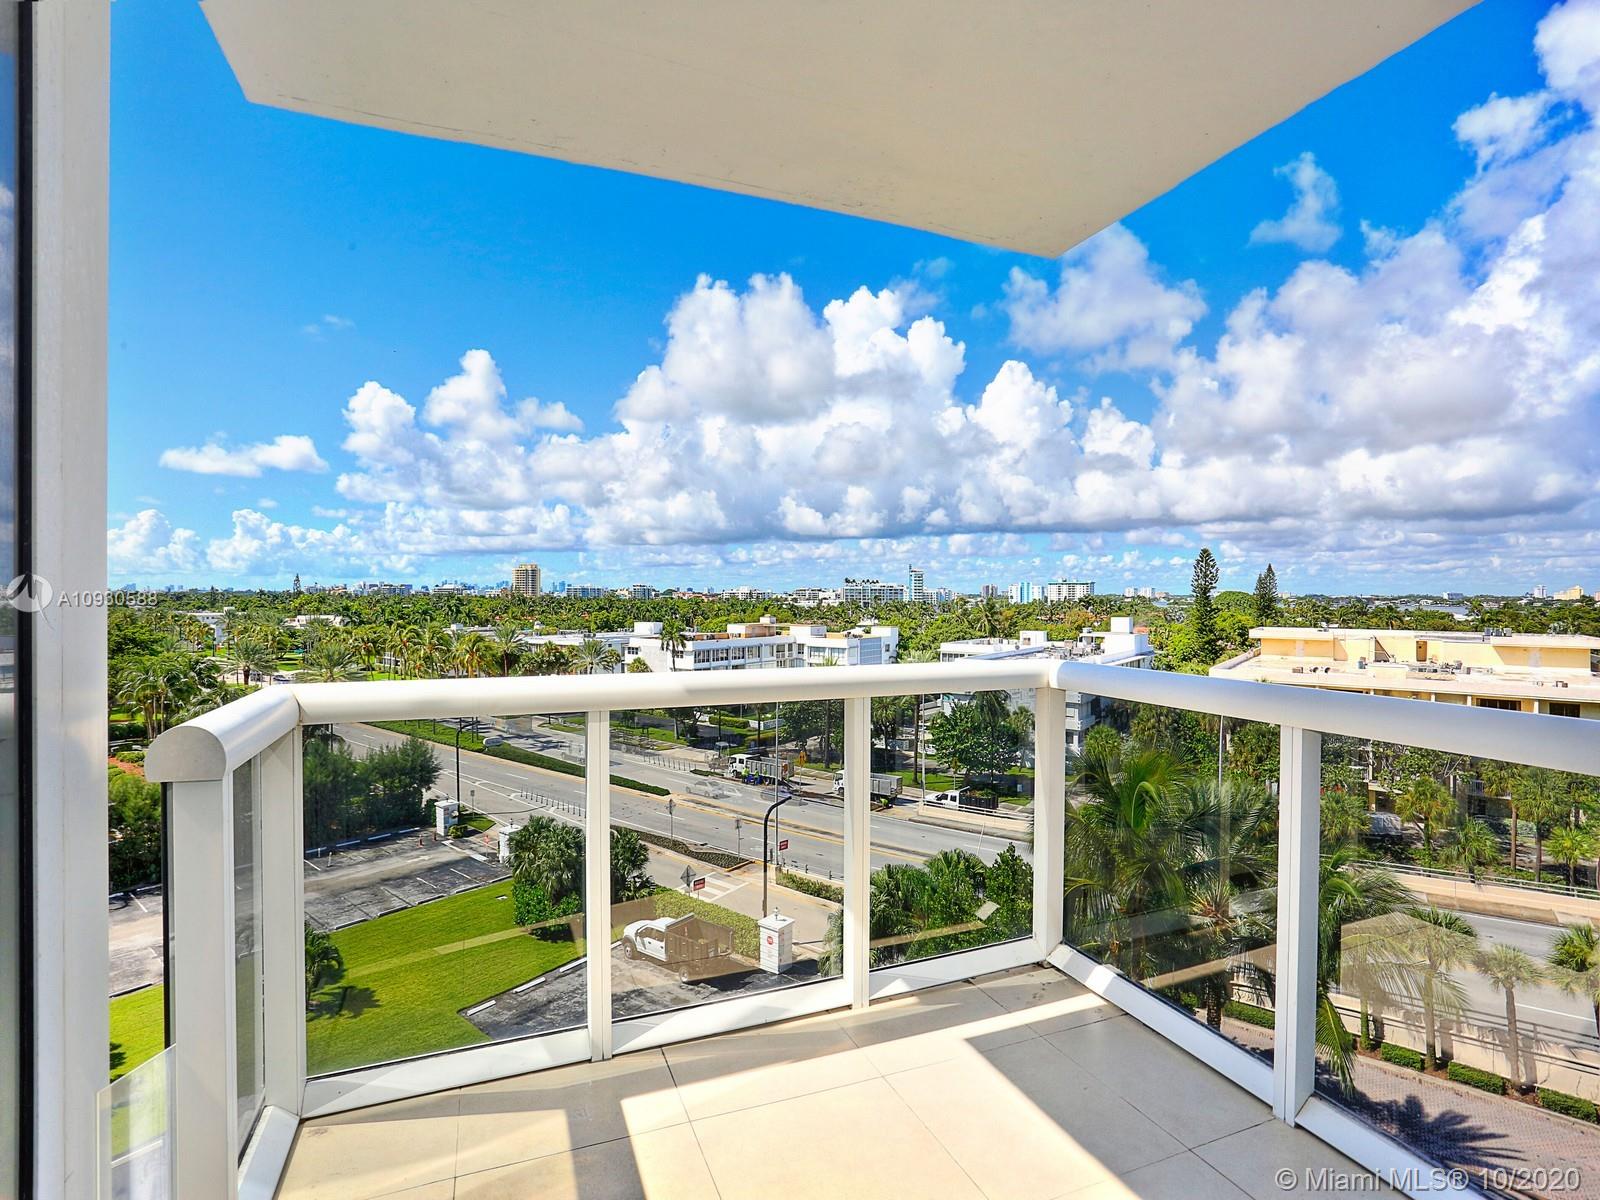 Photo 2 of Harbour House Apt 522 in Bal Harbour - MLS A10930588